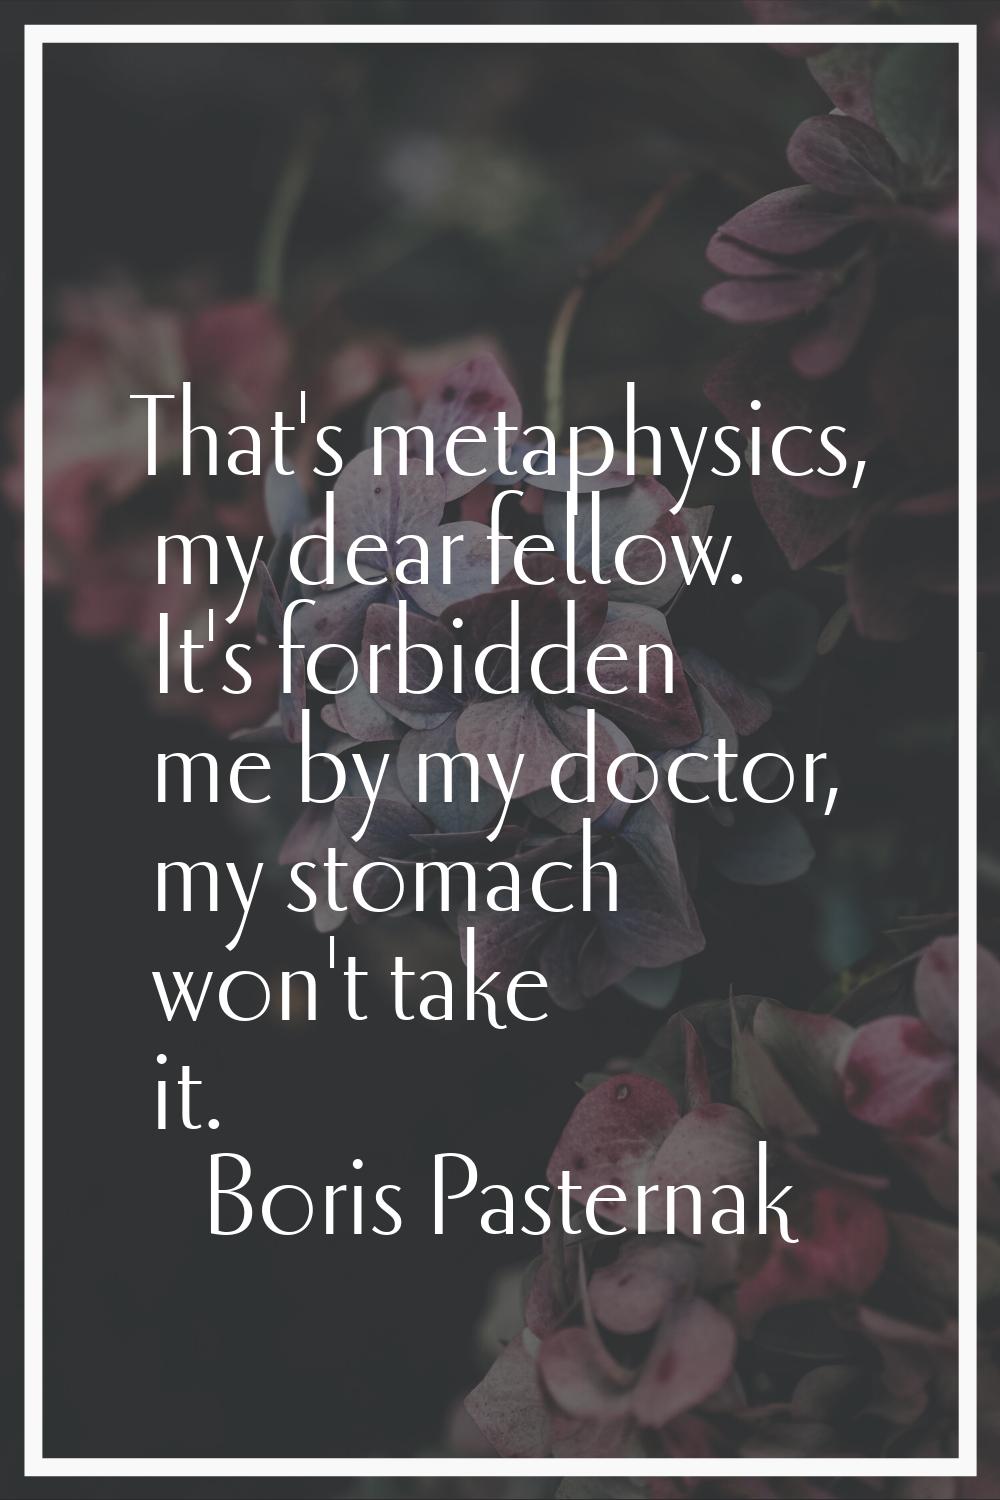 That's metaphysics, my dear fellow. It's forbidden me by my doctor, my stomach won't take it.